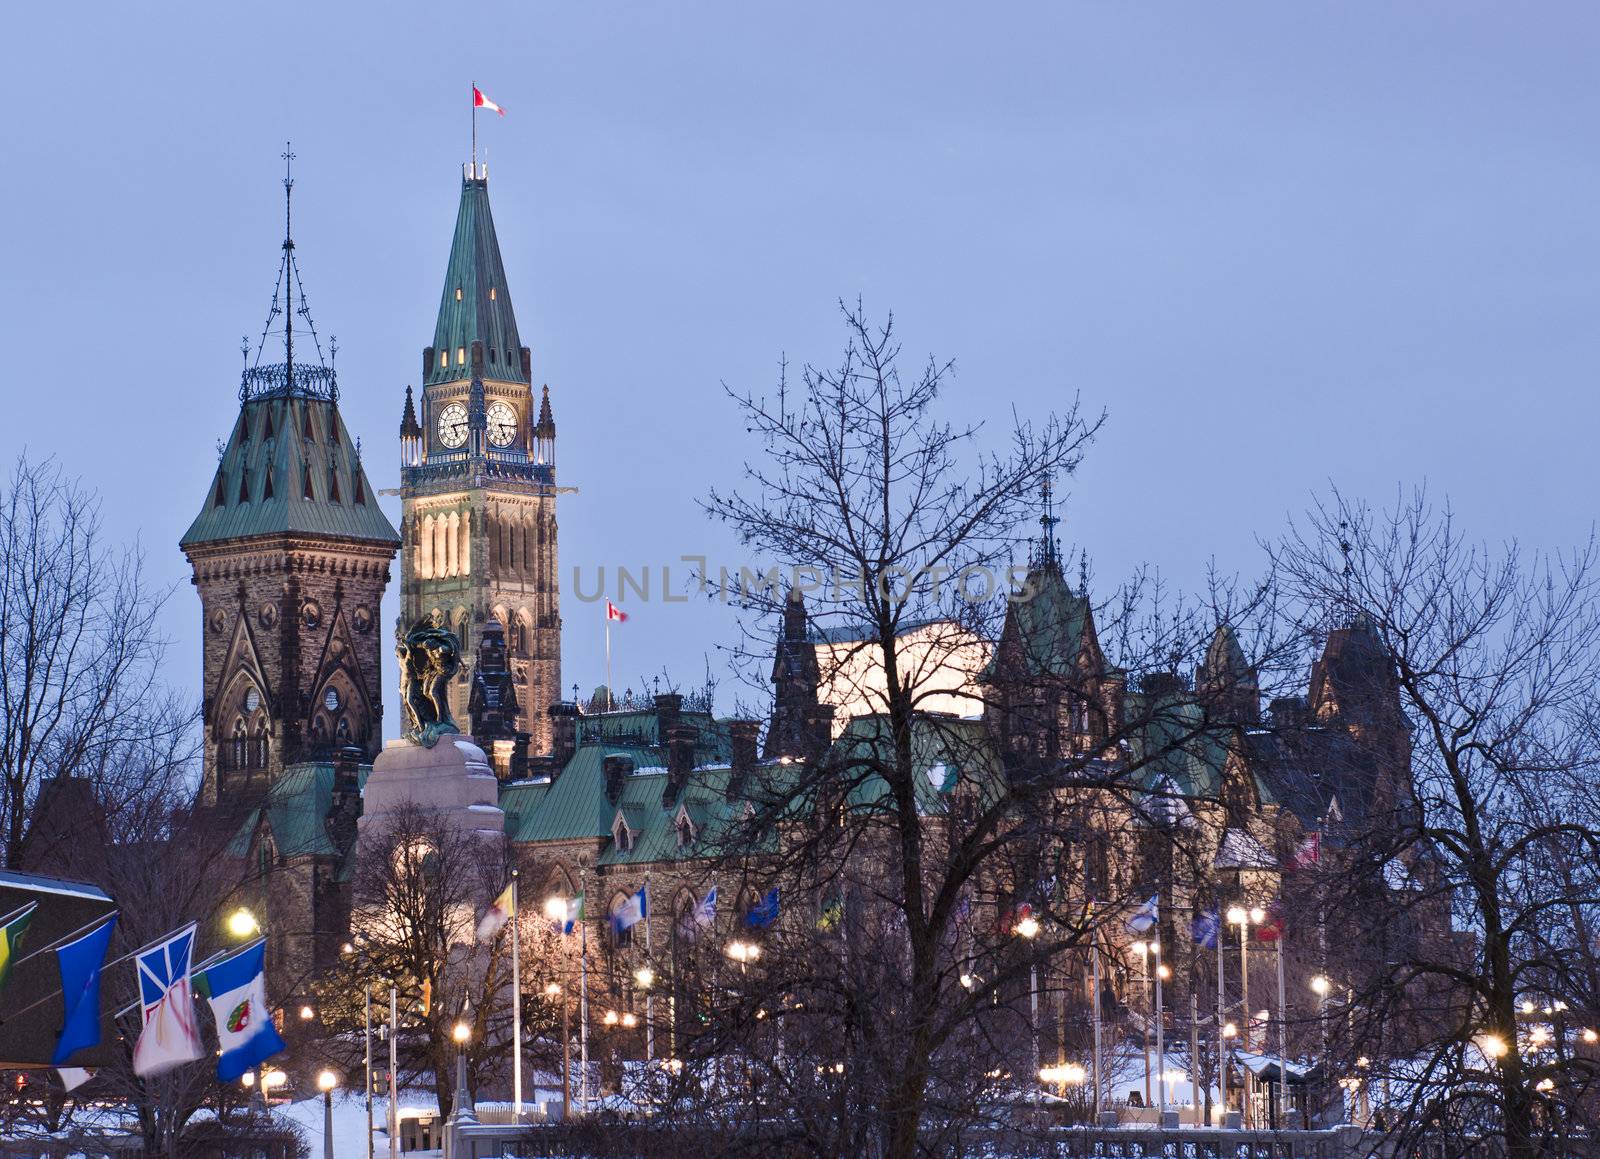 The Canadian Parliament Centre and East Blocks in Ottawa, Ontario, Canada.